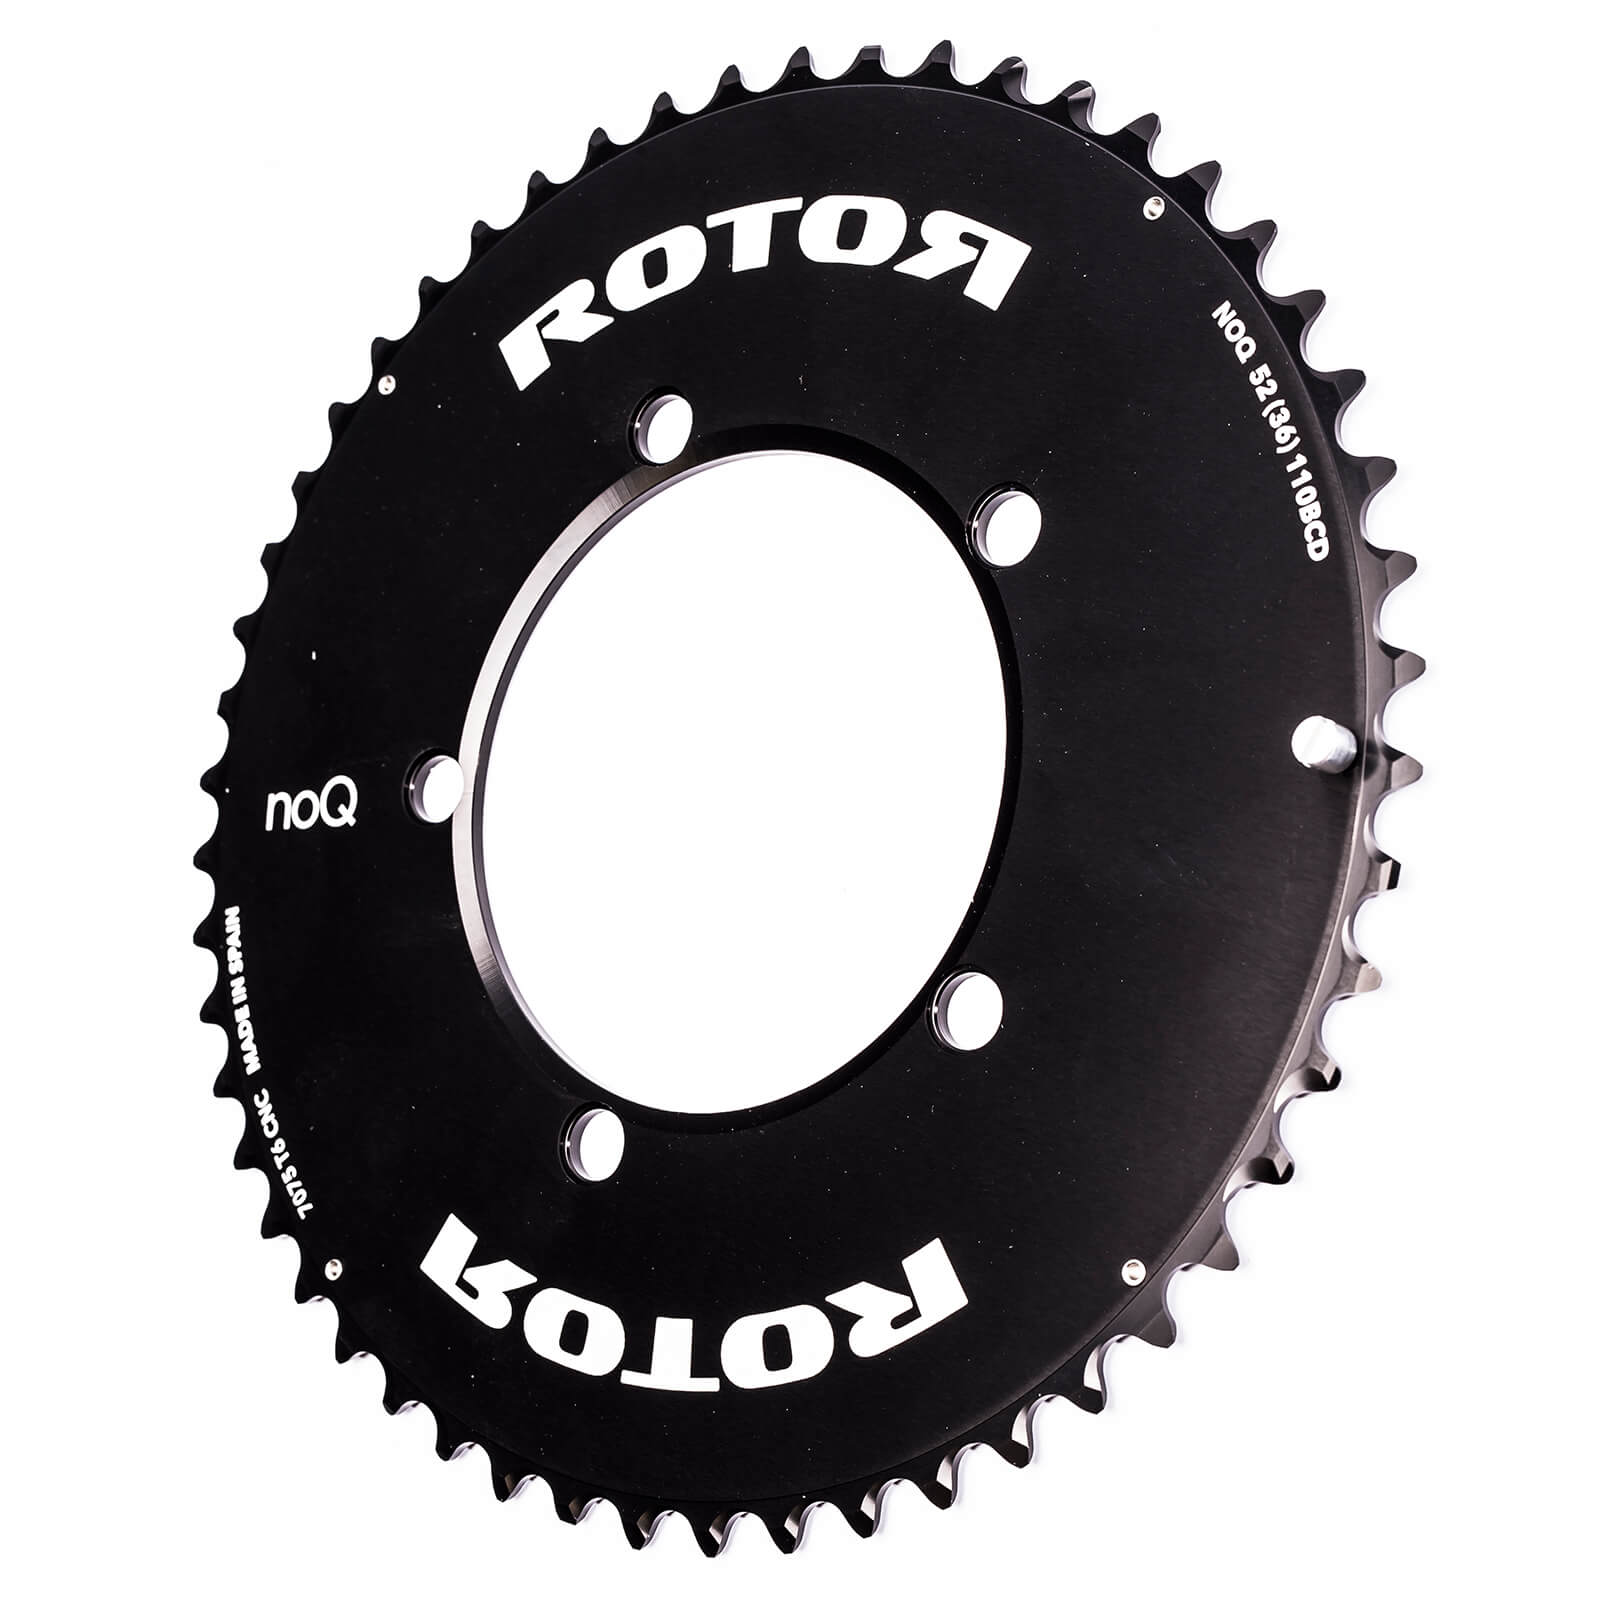 Rotor NoQ Aero Outer Chainring 5 Bolt - 53T